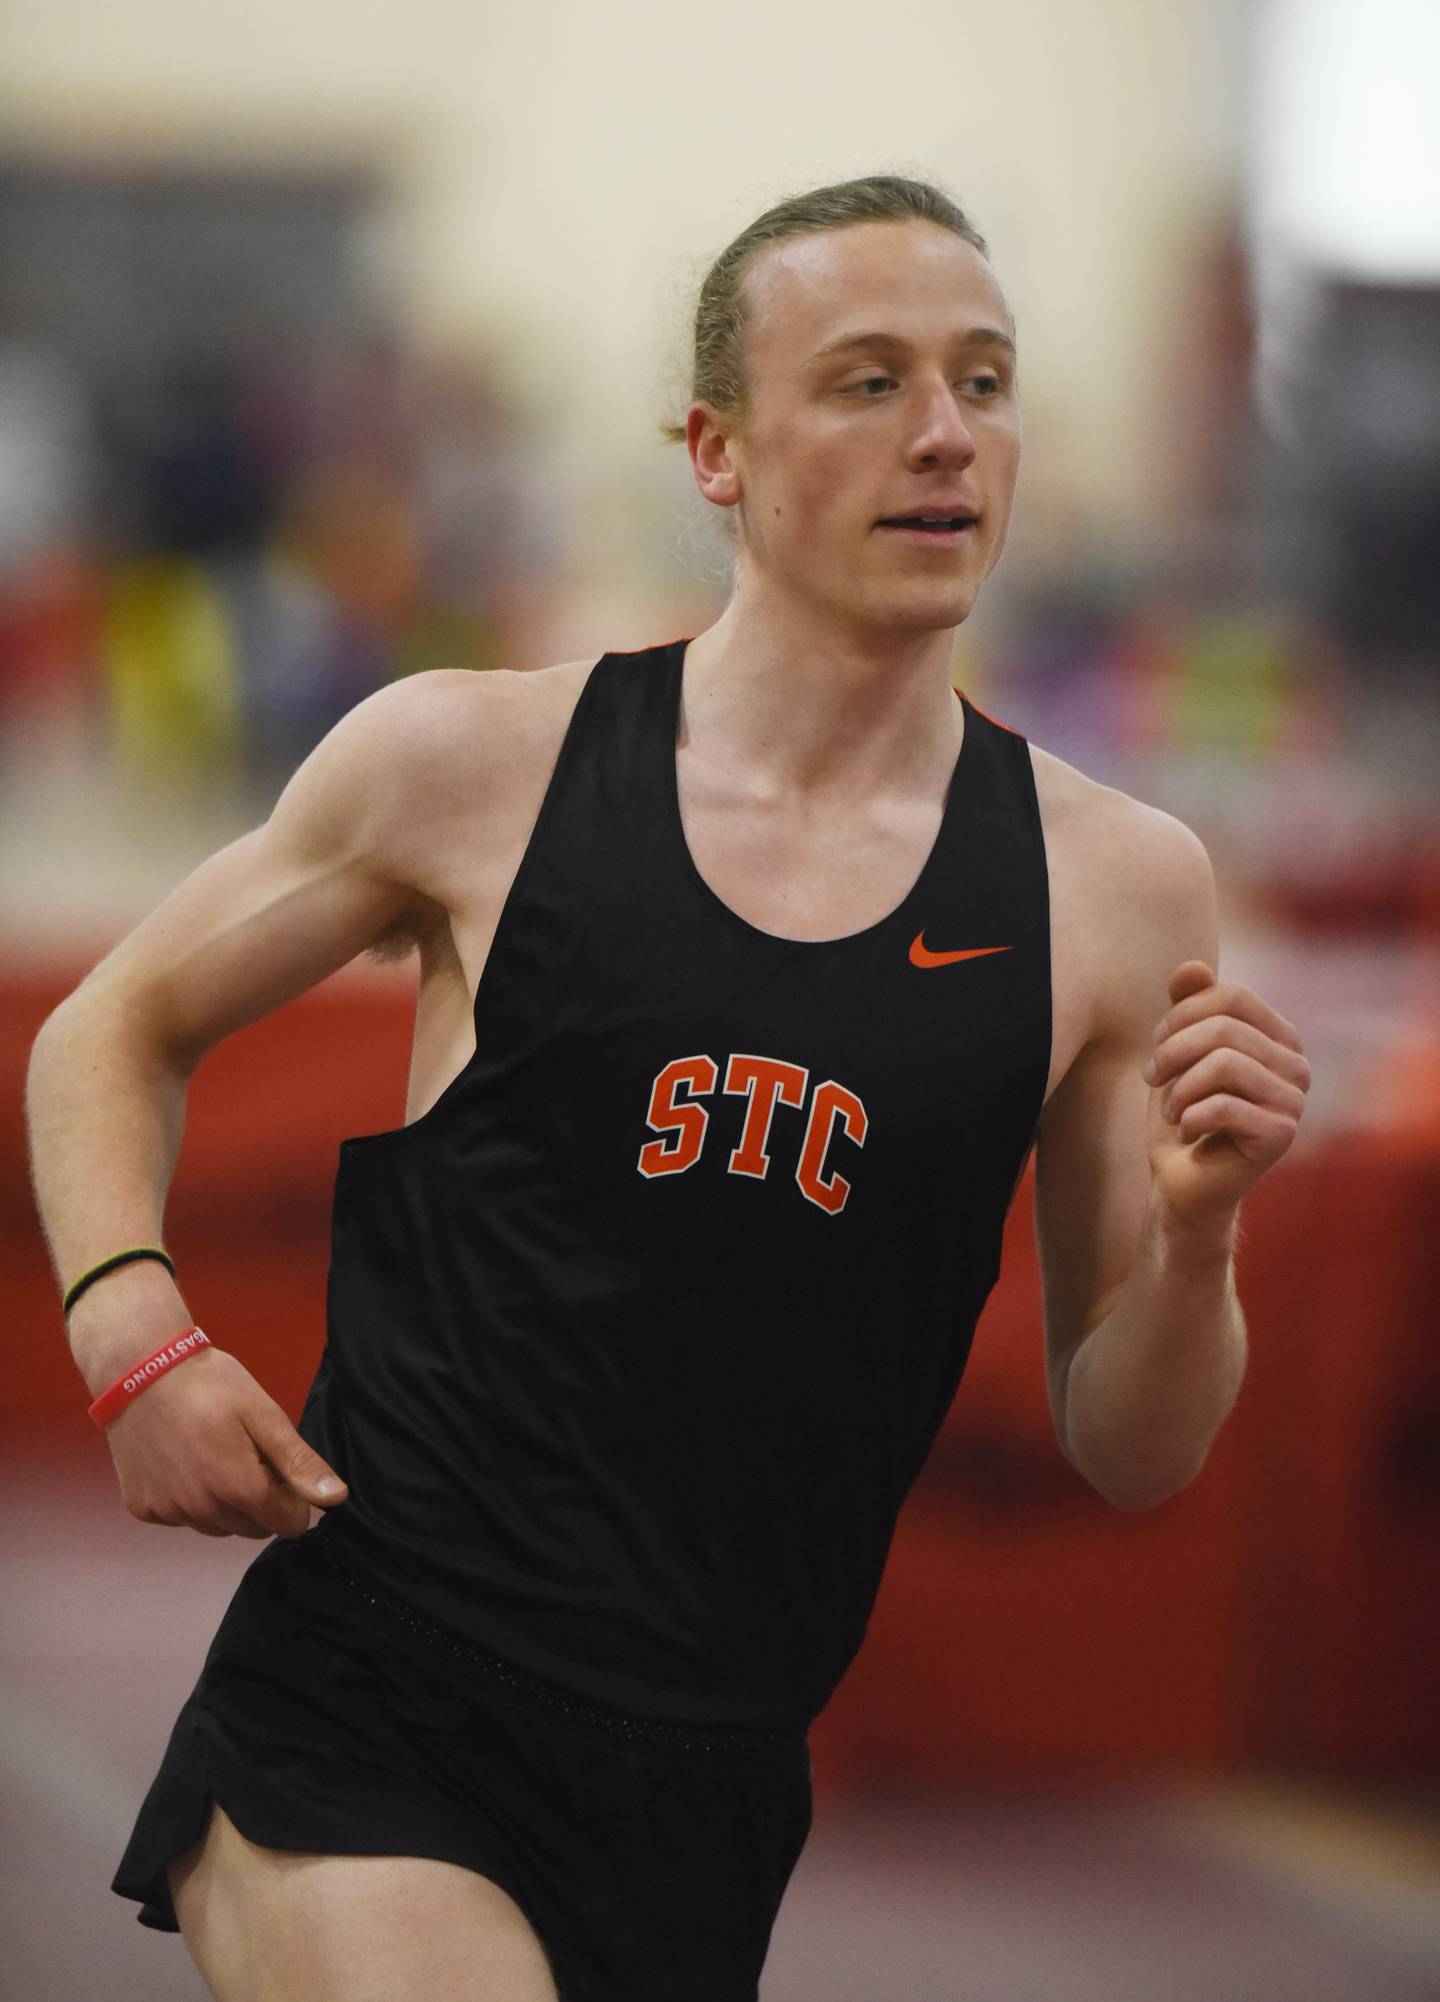 St. Charles East's Micah Wilson competes on his way to a first-place finish in the 3,200-meter run during the DuKane boys indoor track meet at Batavia High School Saturday.